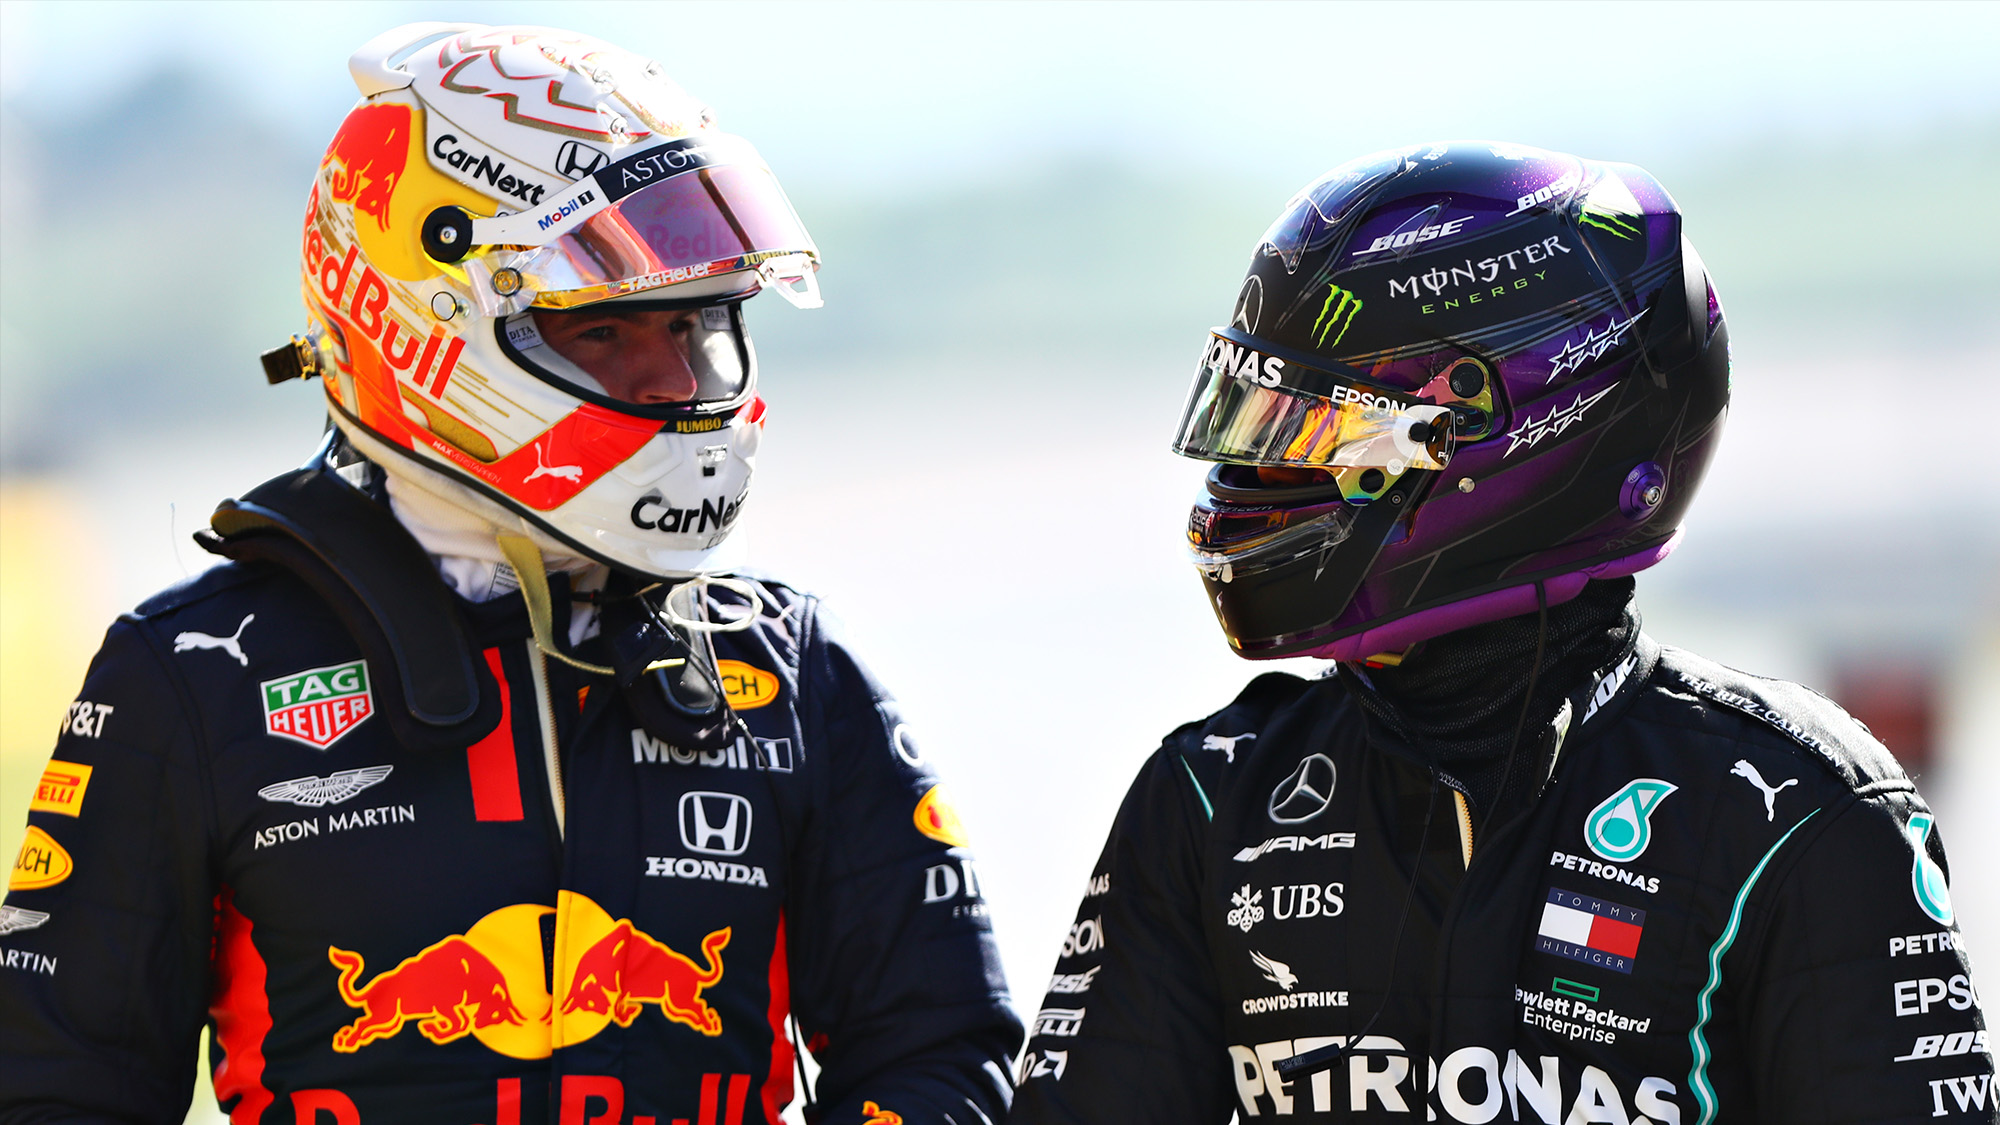 Verstappen beats Hamilton on raw talent, it is only extra experience that gives Lewis the advantage - Jenson Button